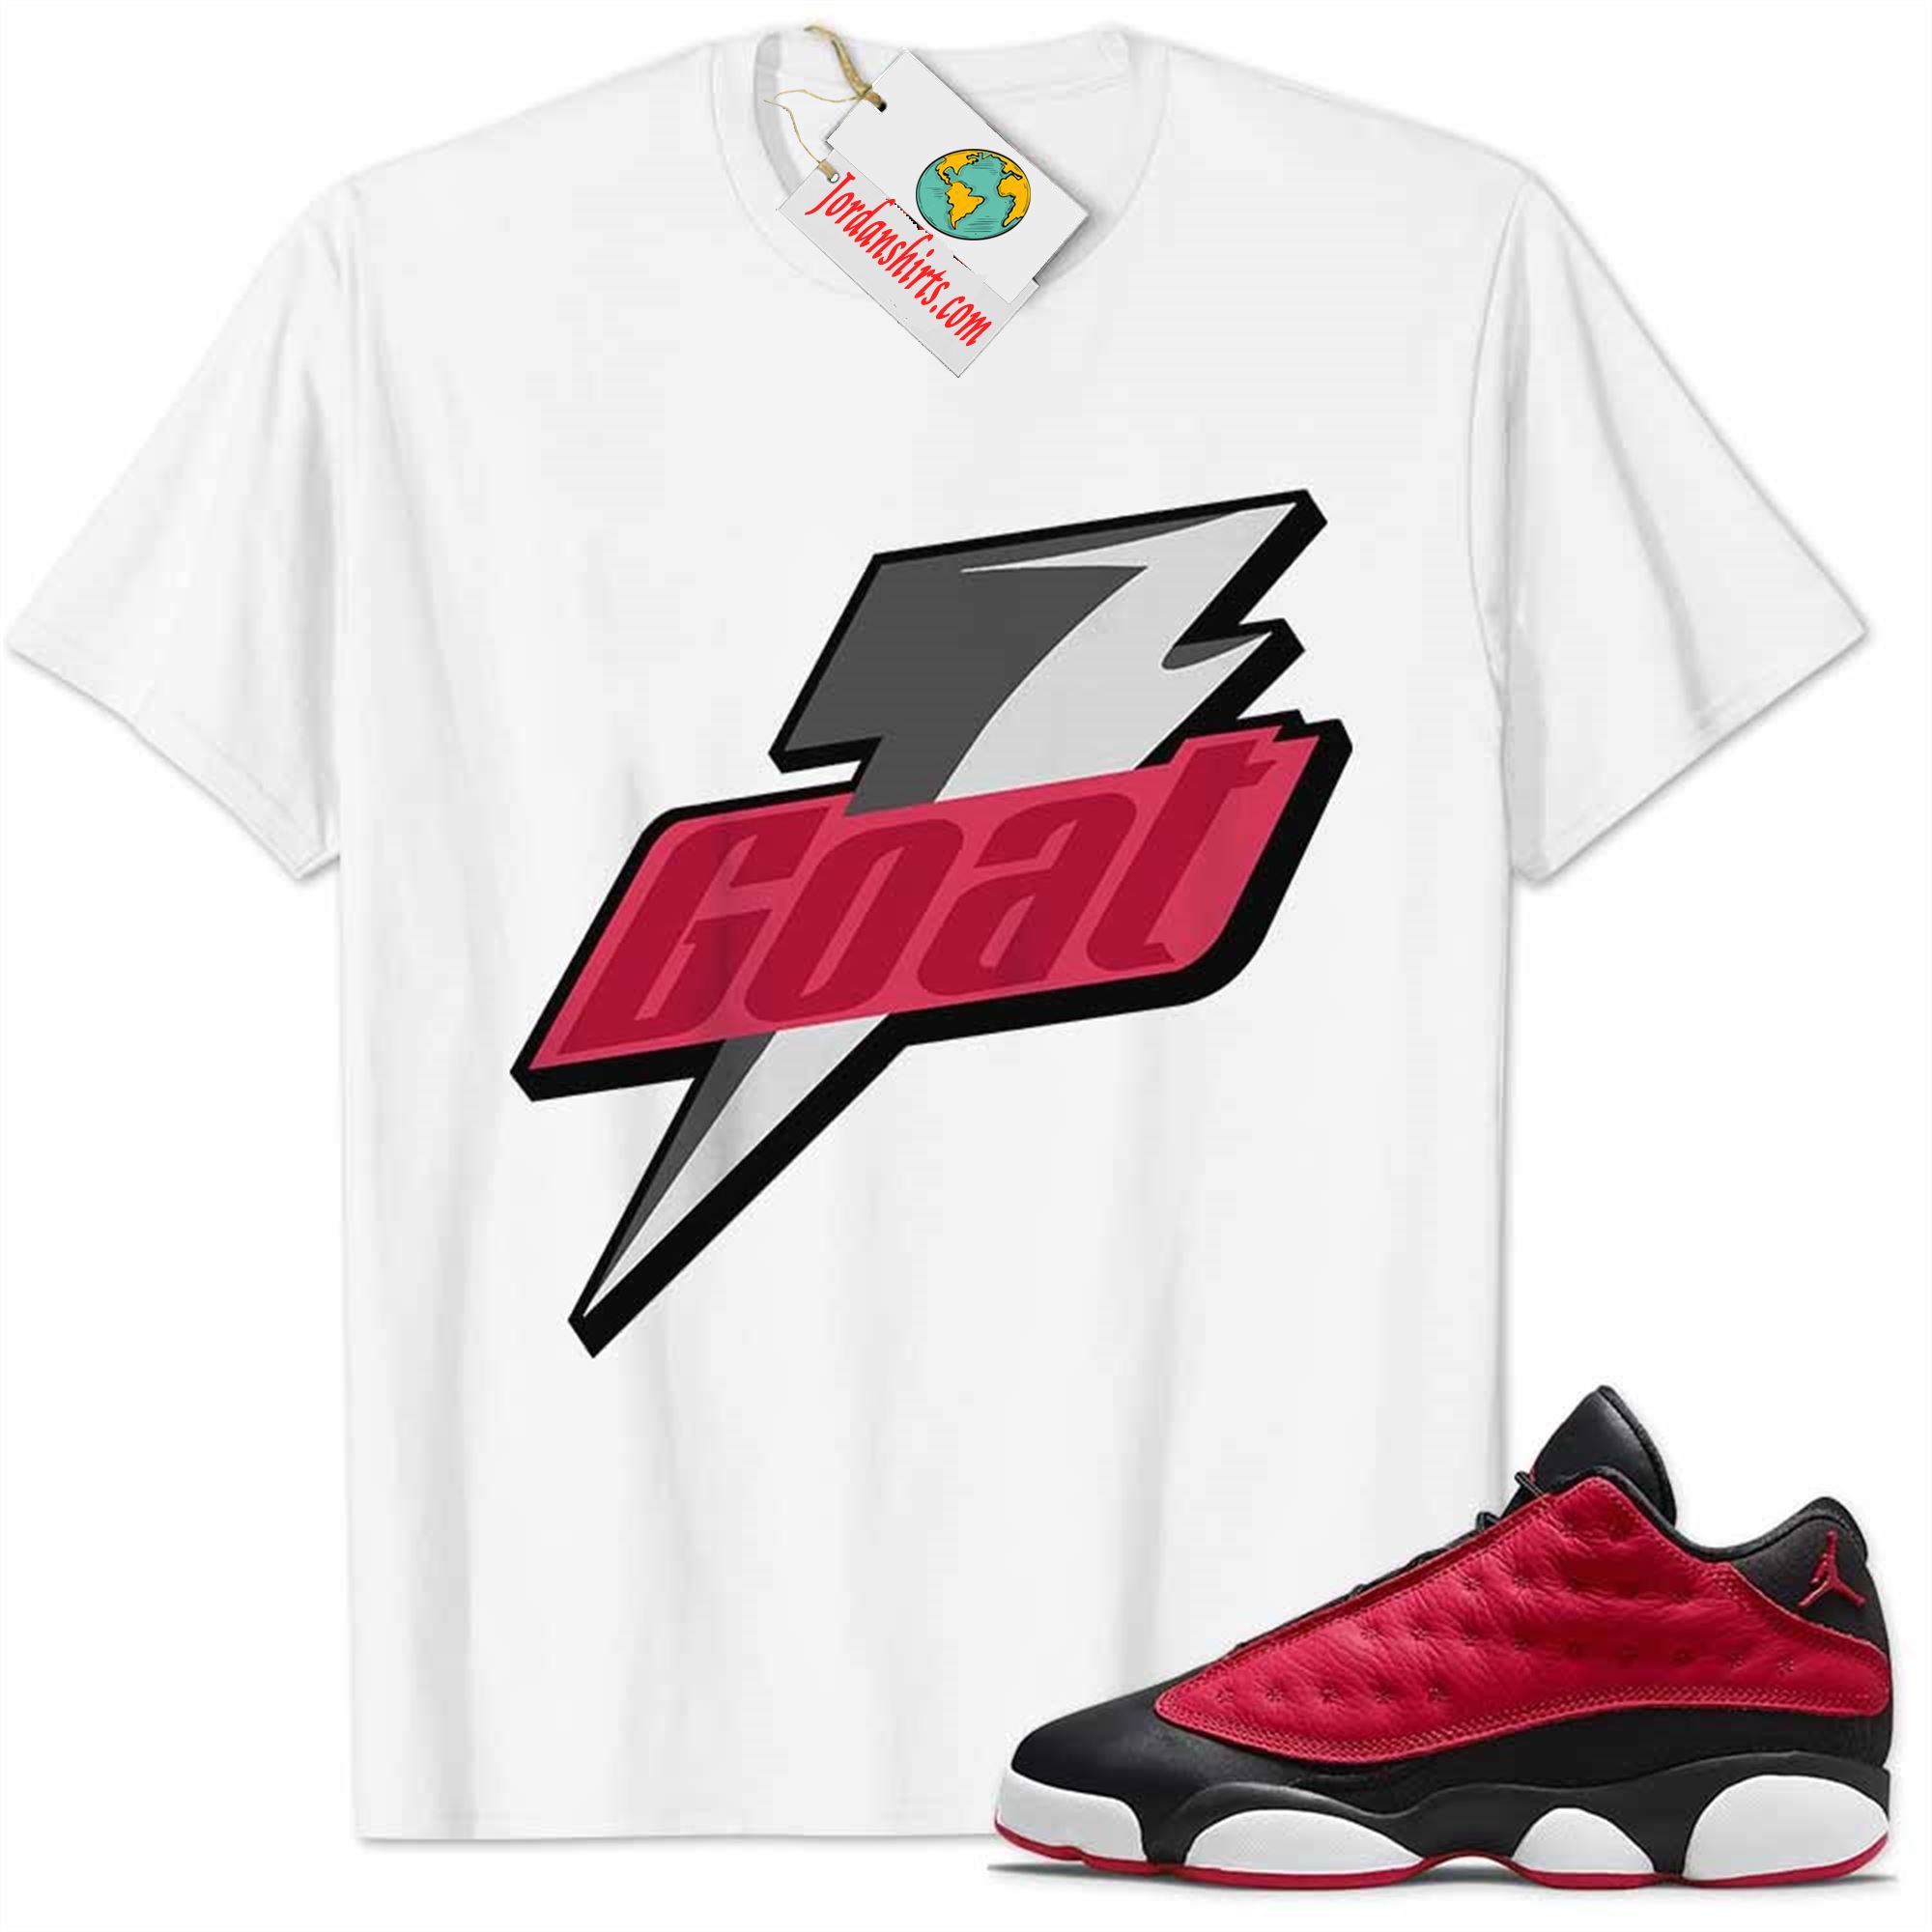 Jordan 13 Shirt, Very Berry 13s Shirt Goat Greatest Of All Time White Full Size Up To 5xl